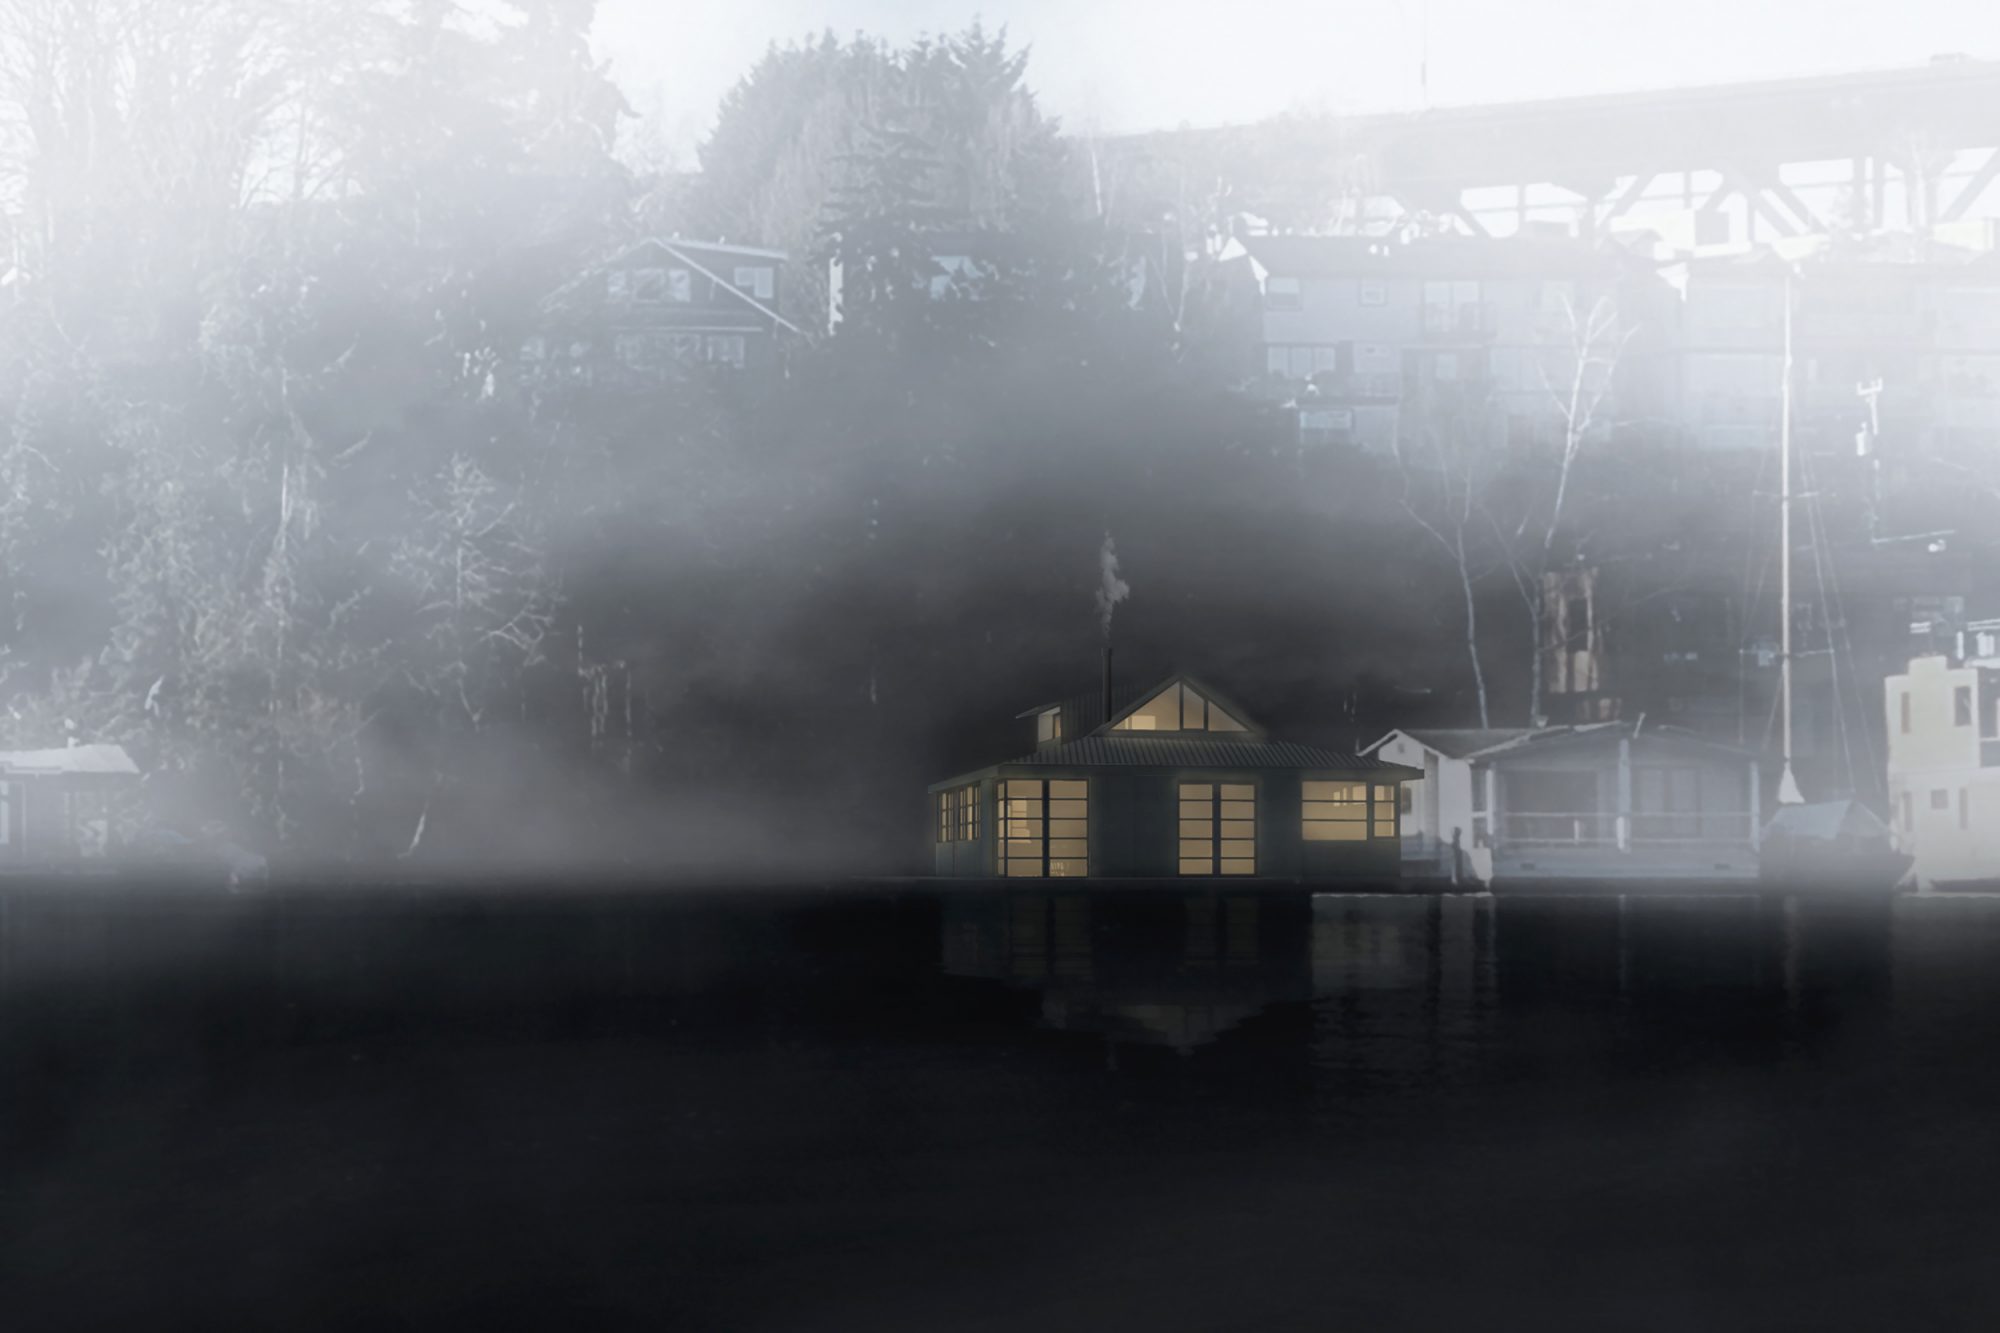 PORTAGE BAY HOUSEBOAT CONCEPT FOGGY RENDERING